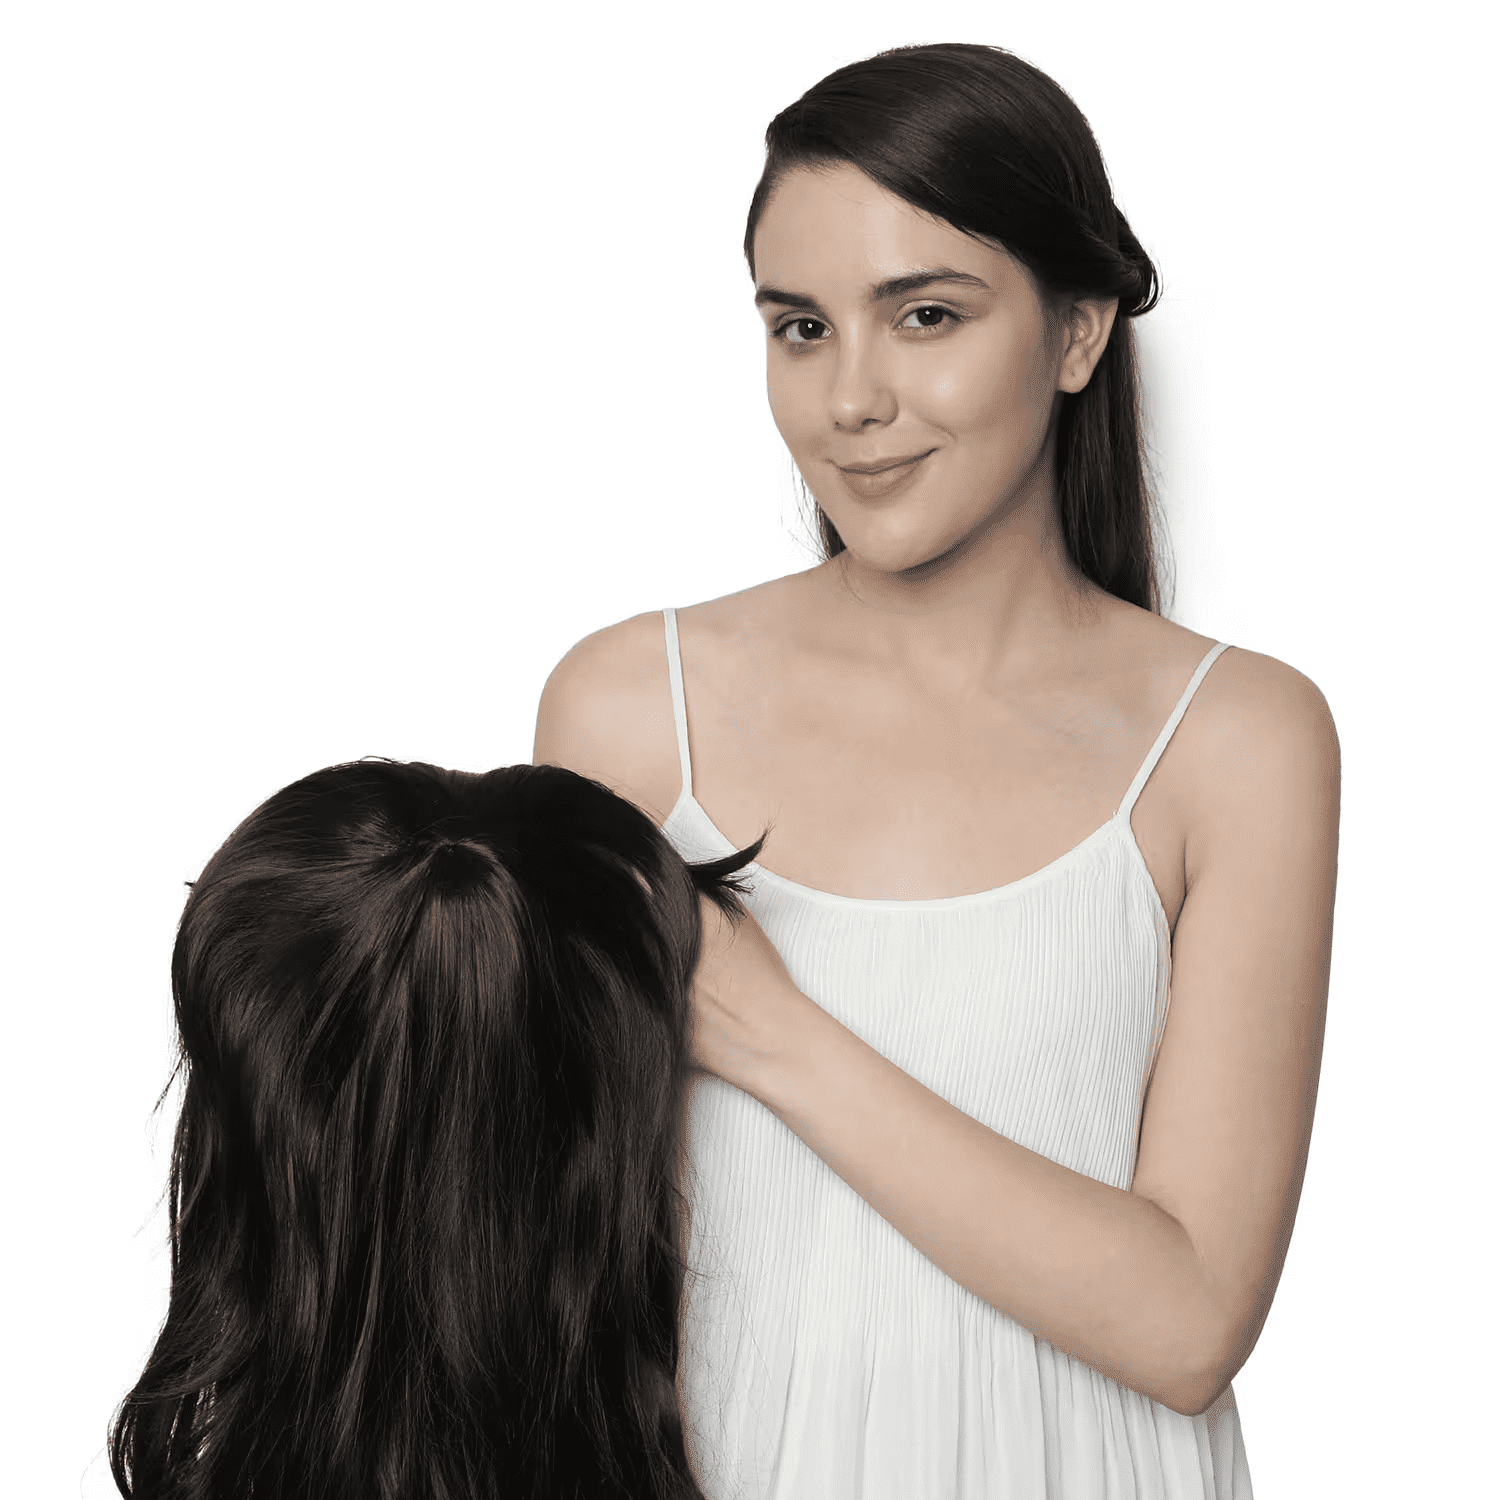 How to Hide Long Hair Under a Wig: Alhairstudio